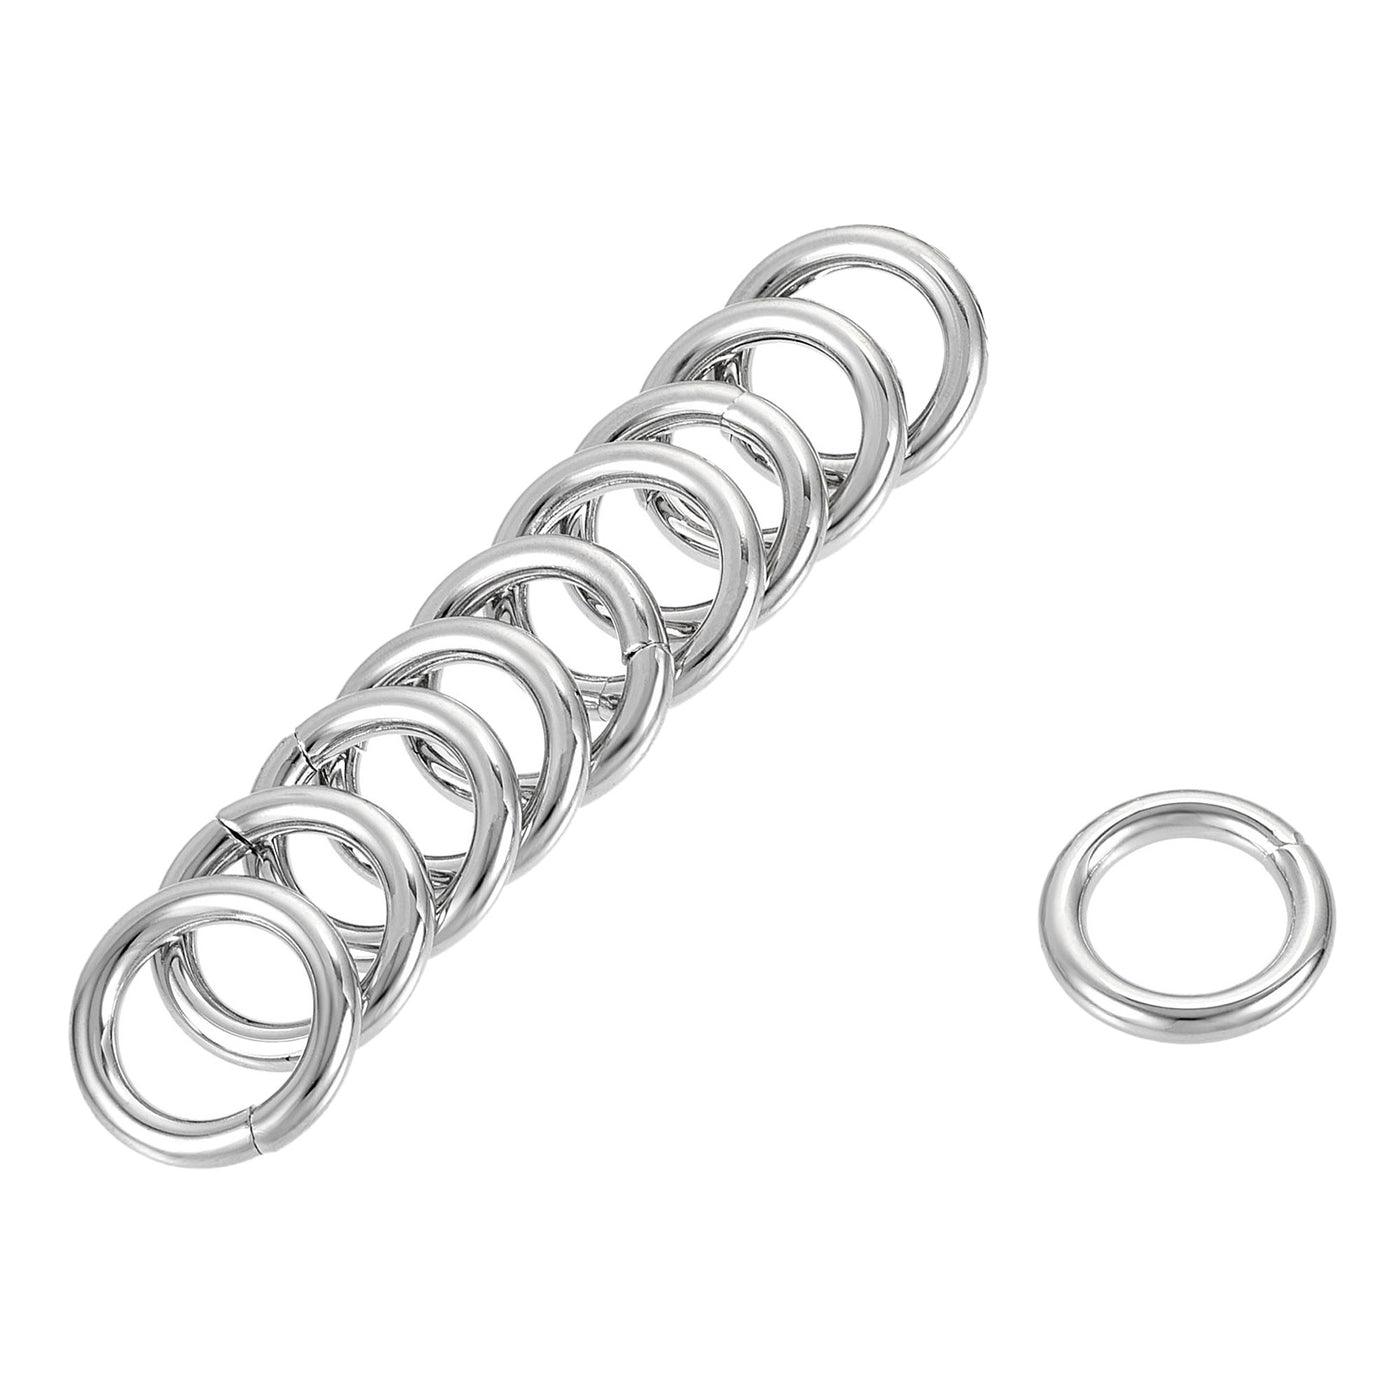 uxcell Uxcell Metal O Ring 16mm(0.63") ID 3.8mm Thickness Non-Welded Rings Silver Tone 15pcs